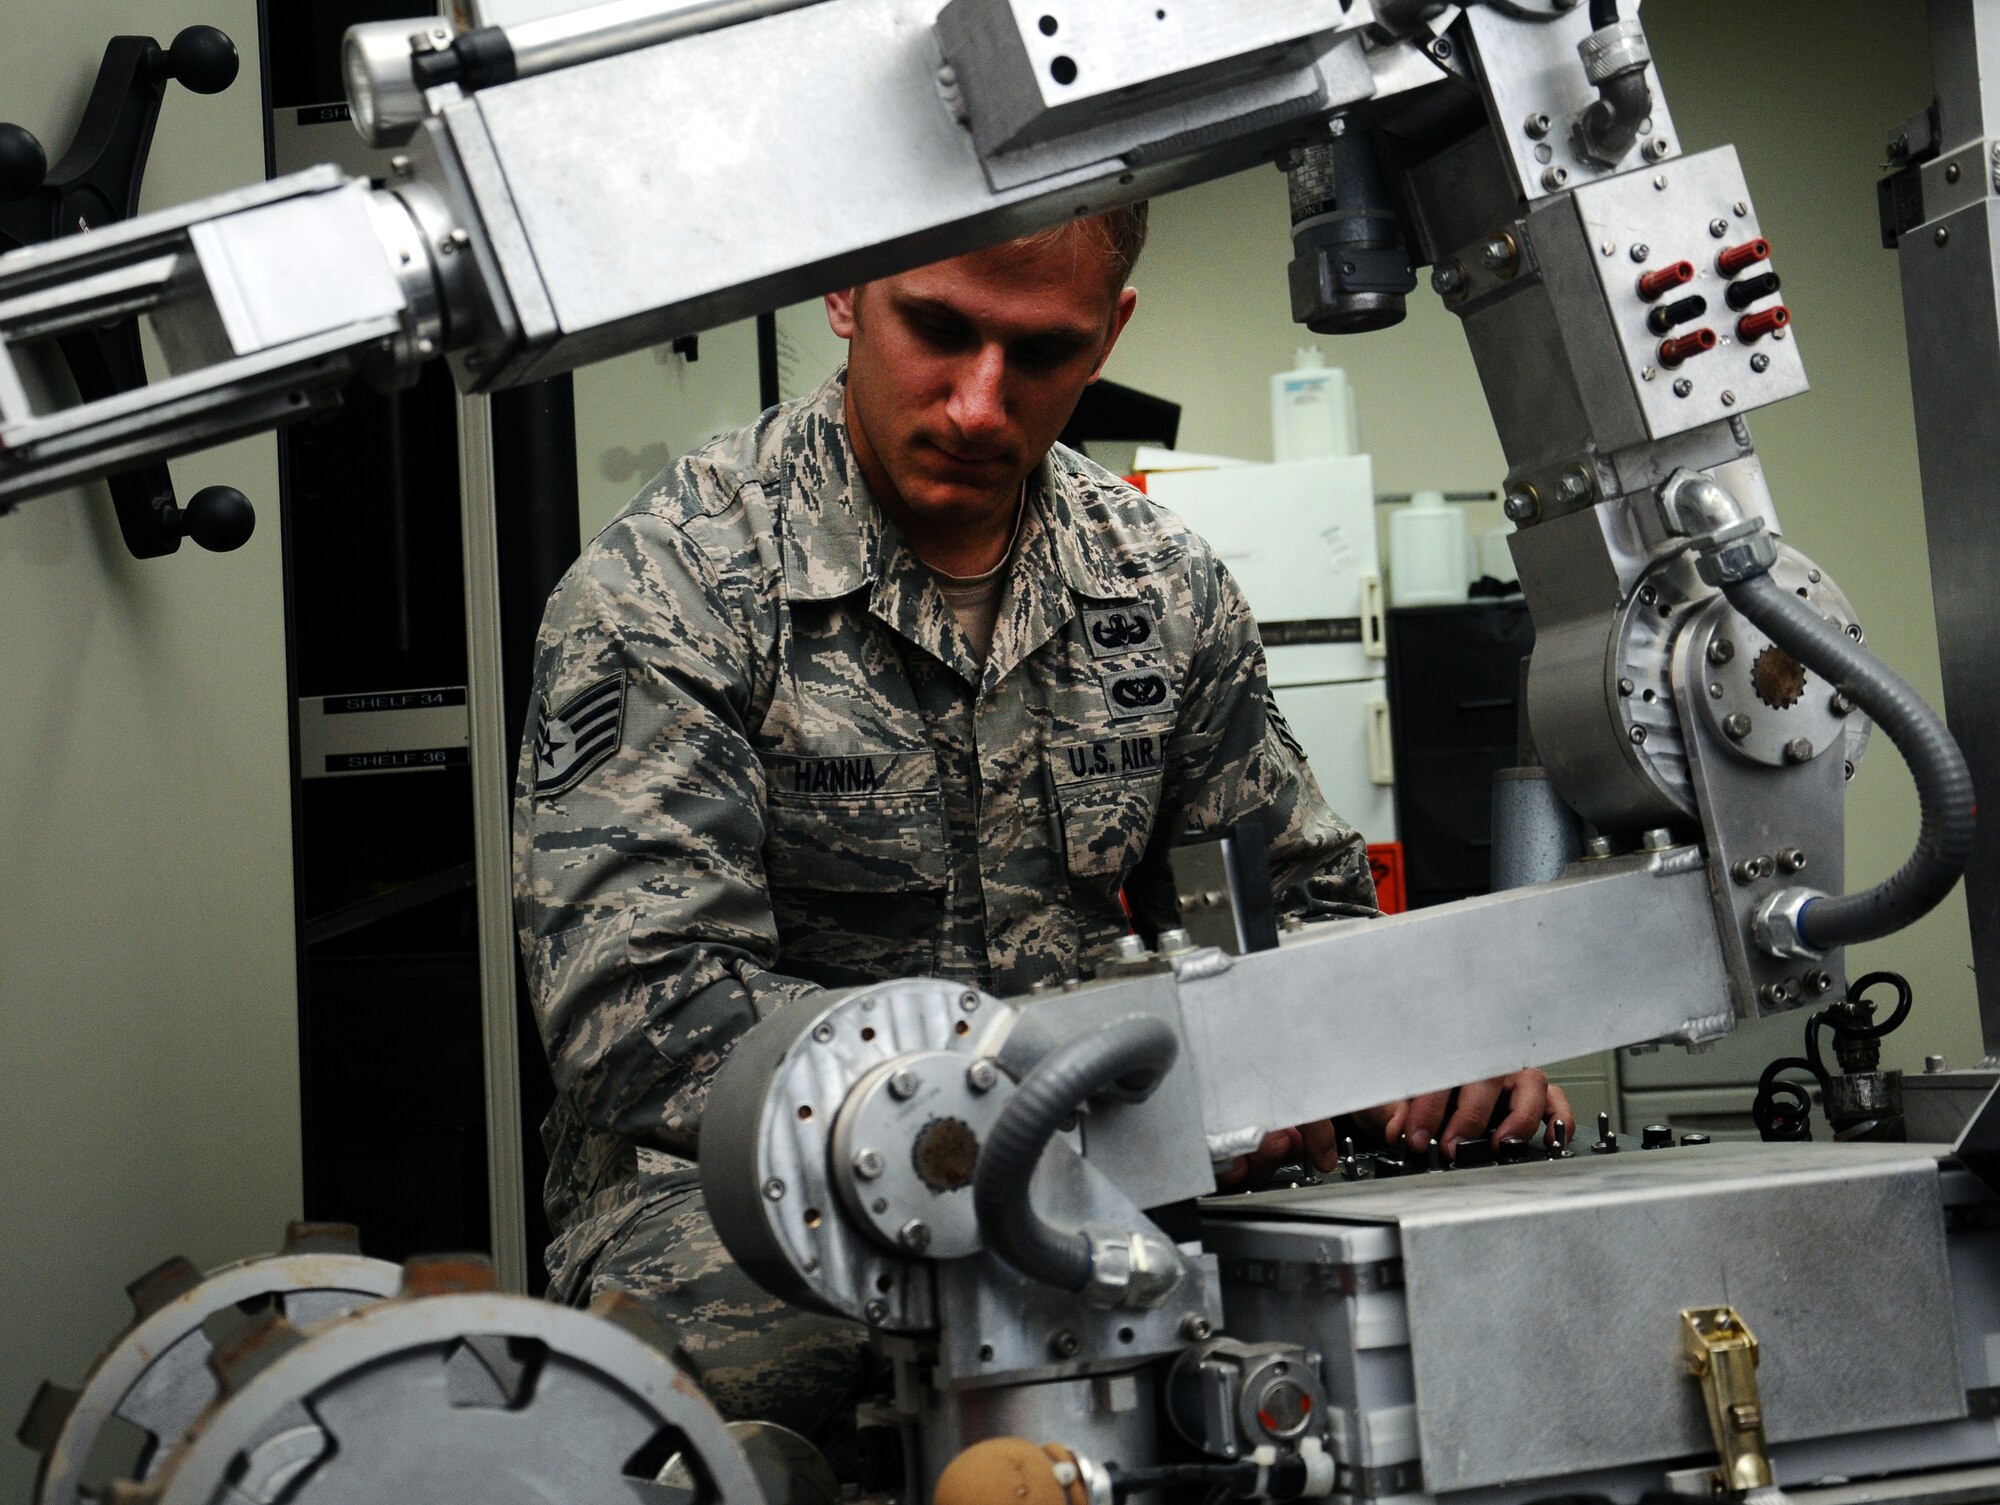 Staff Sgt. Joshua Hanna, 36th Civil Engineer Squadron explosive ordnance disposal journeyman, changes the battery on a F6A EOD robot on Andersen Air Force Base, Guam, April 11, 2013. Hanna was selected as the Pacific Air Forces’ 2012 Outstanding Airman of the Year in the Airman category for his superior performance while deployed and at home station. (U.S. Air Force photo by Airman 1st Class Mariah Haddenham/Released)